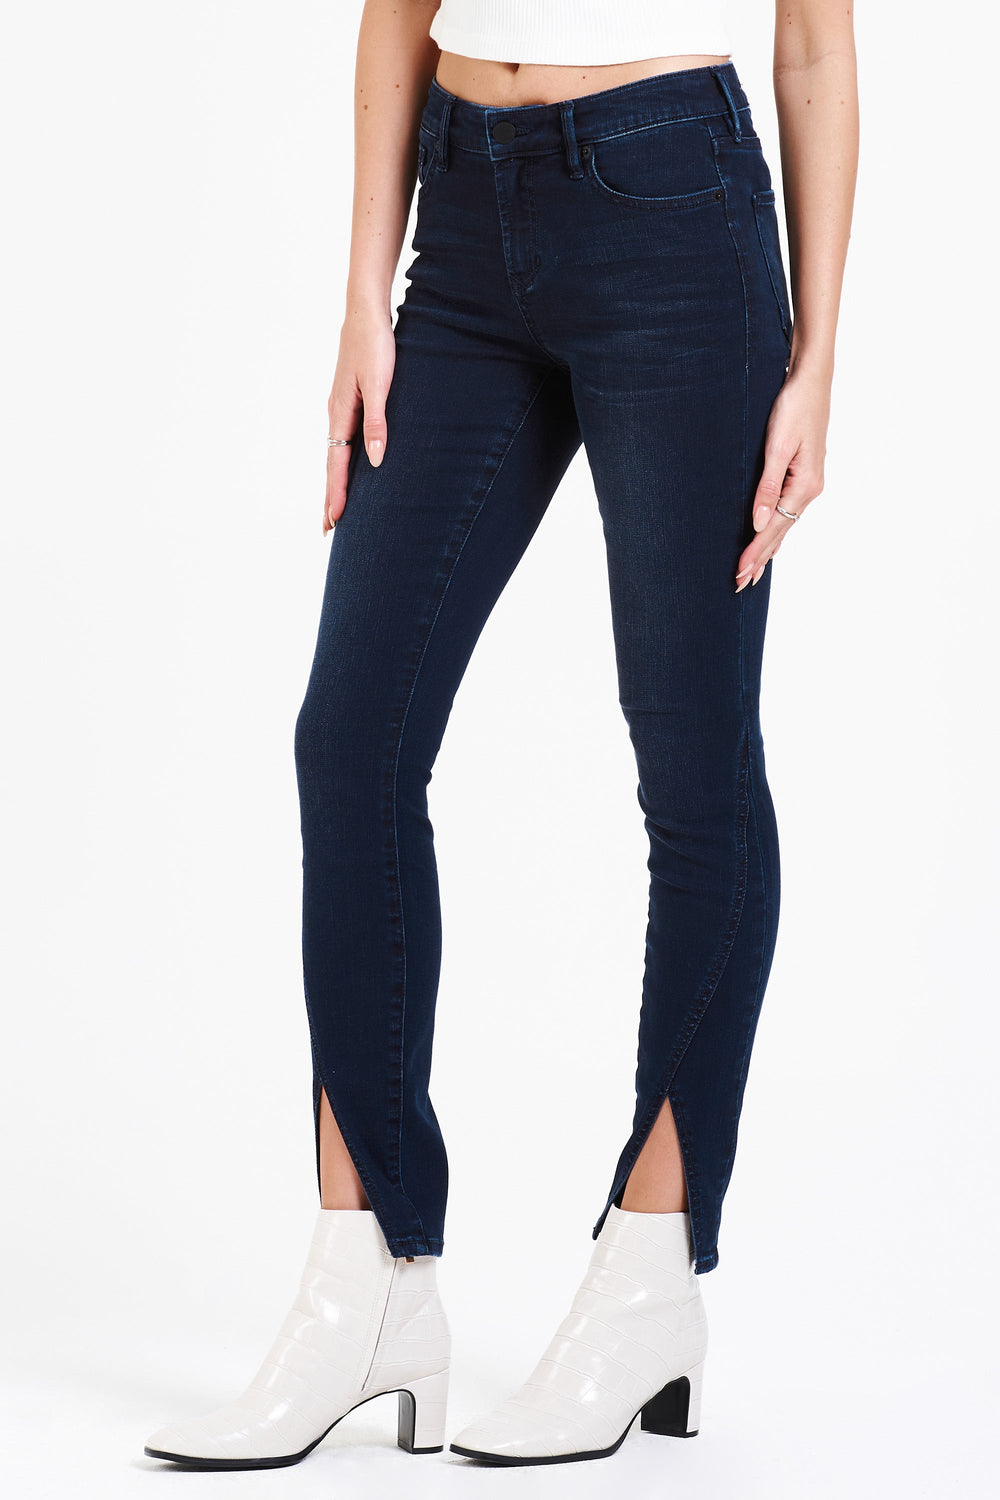 image of a female model wearing a EMBER HIGH RISE SKINNY JEANS CONFESSION JEANS